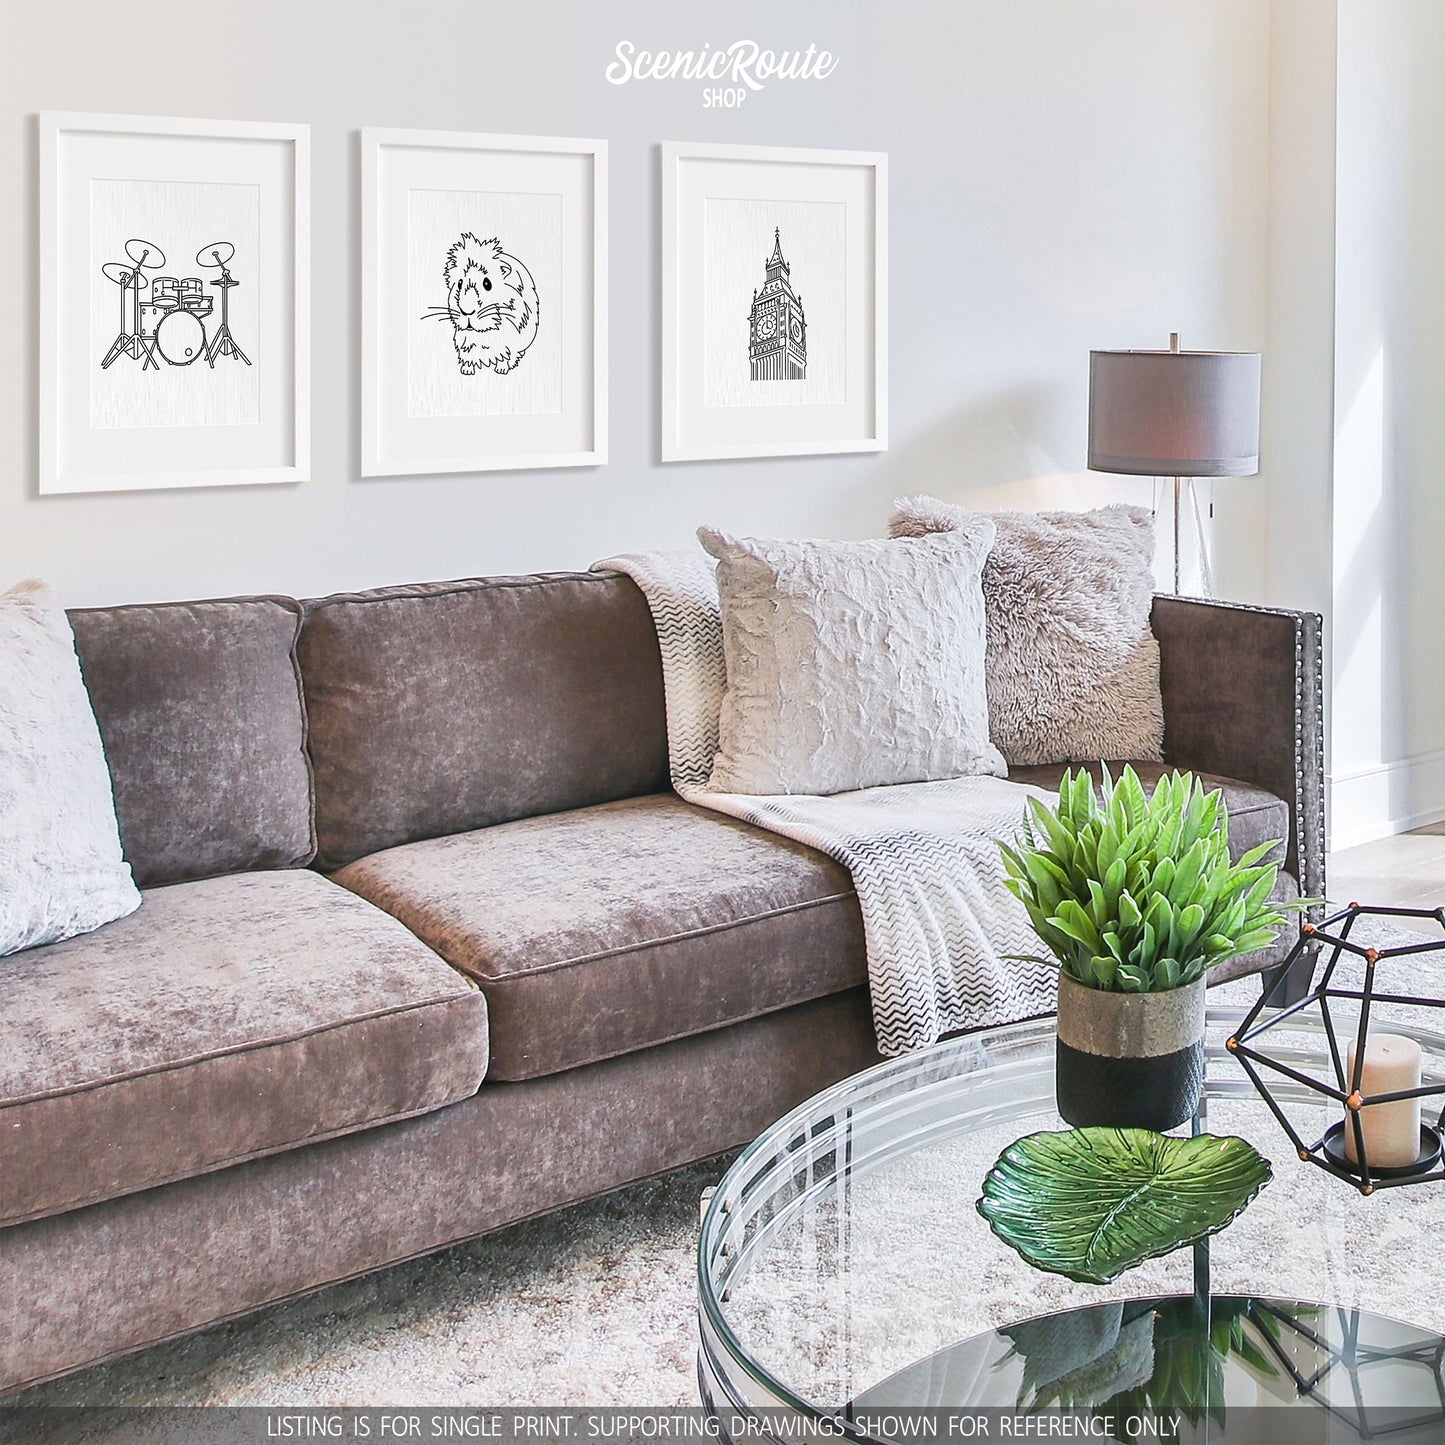 A group of three framed drawings on a white wall hanging above a couch with pillows and a blanket. The line art drawings include Drums, Guinea Pig, and Big Ben